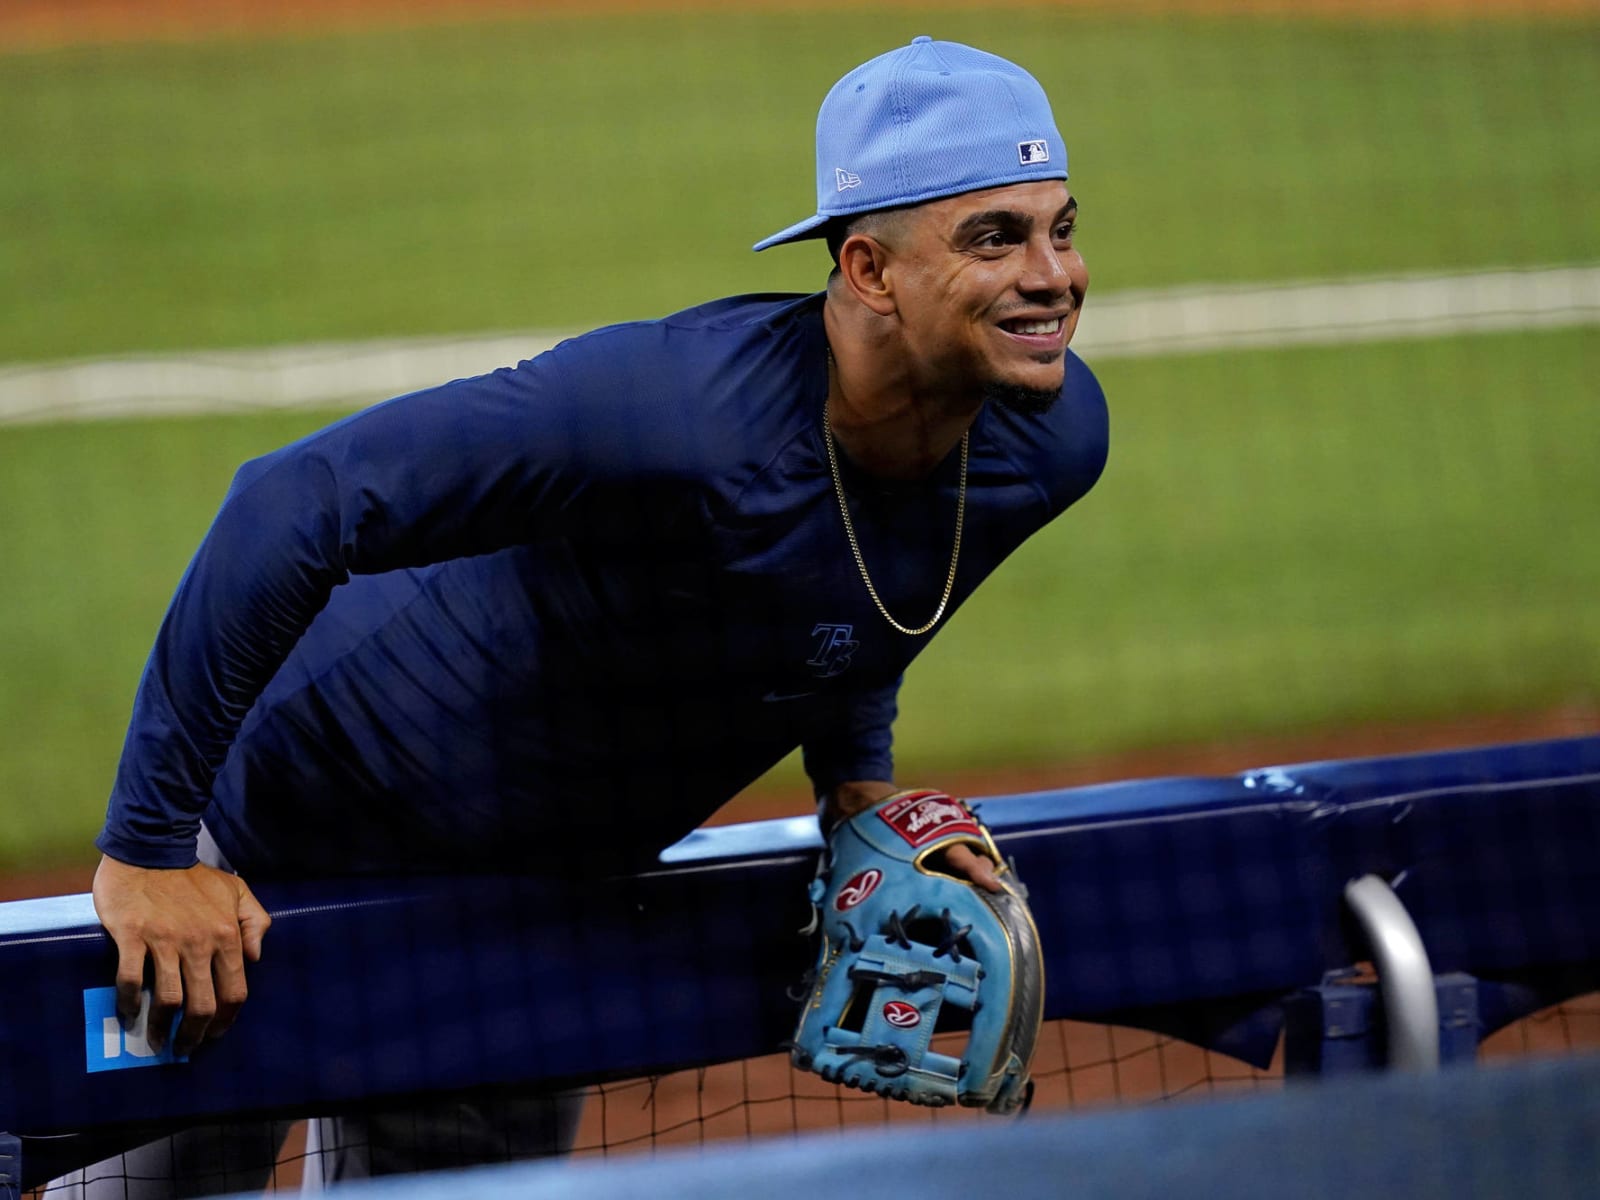 Willy Adames is ready to join the Rays in 2018, whenever that may be -  DRaysBay